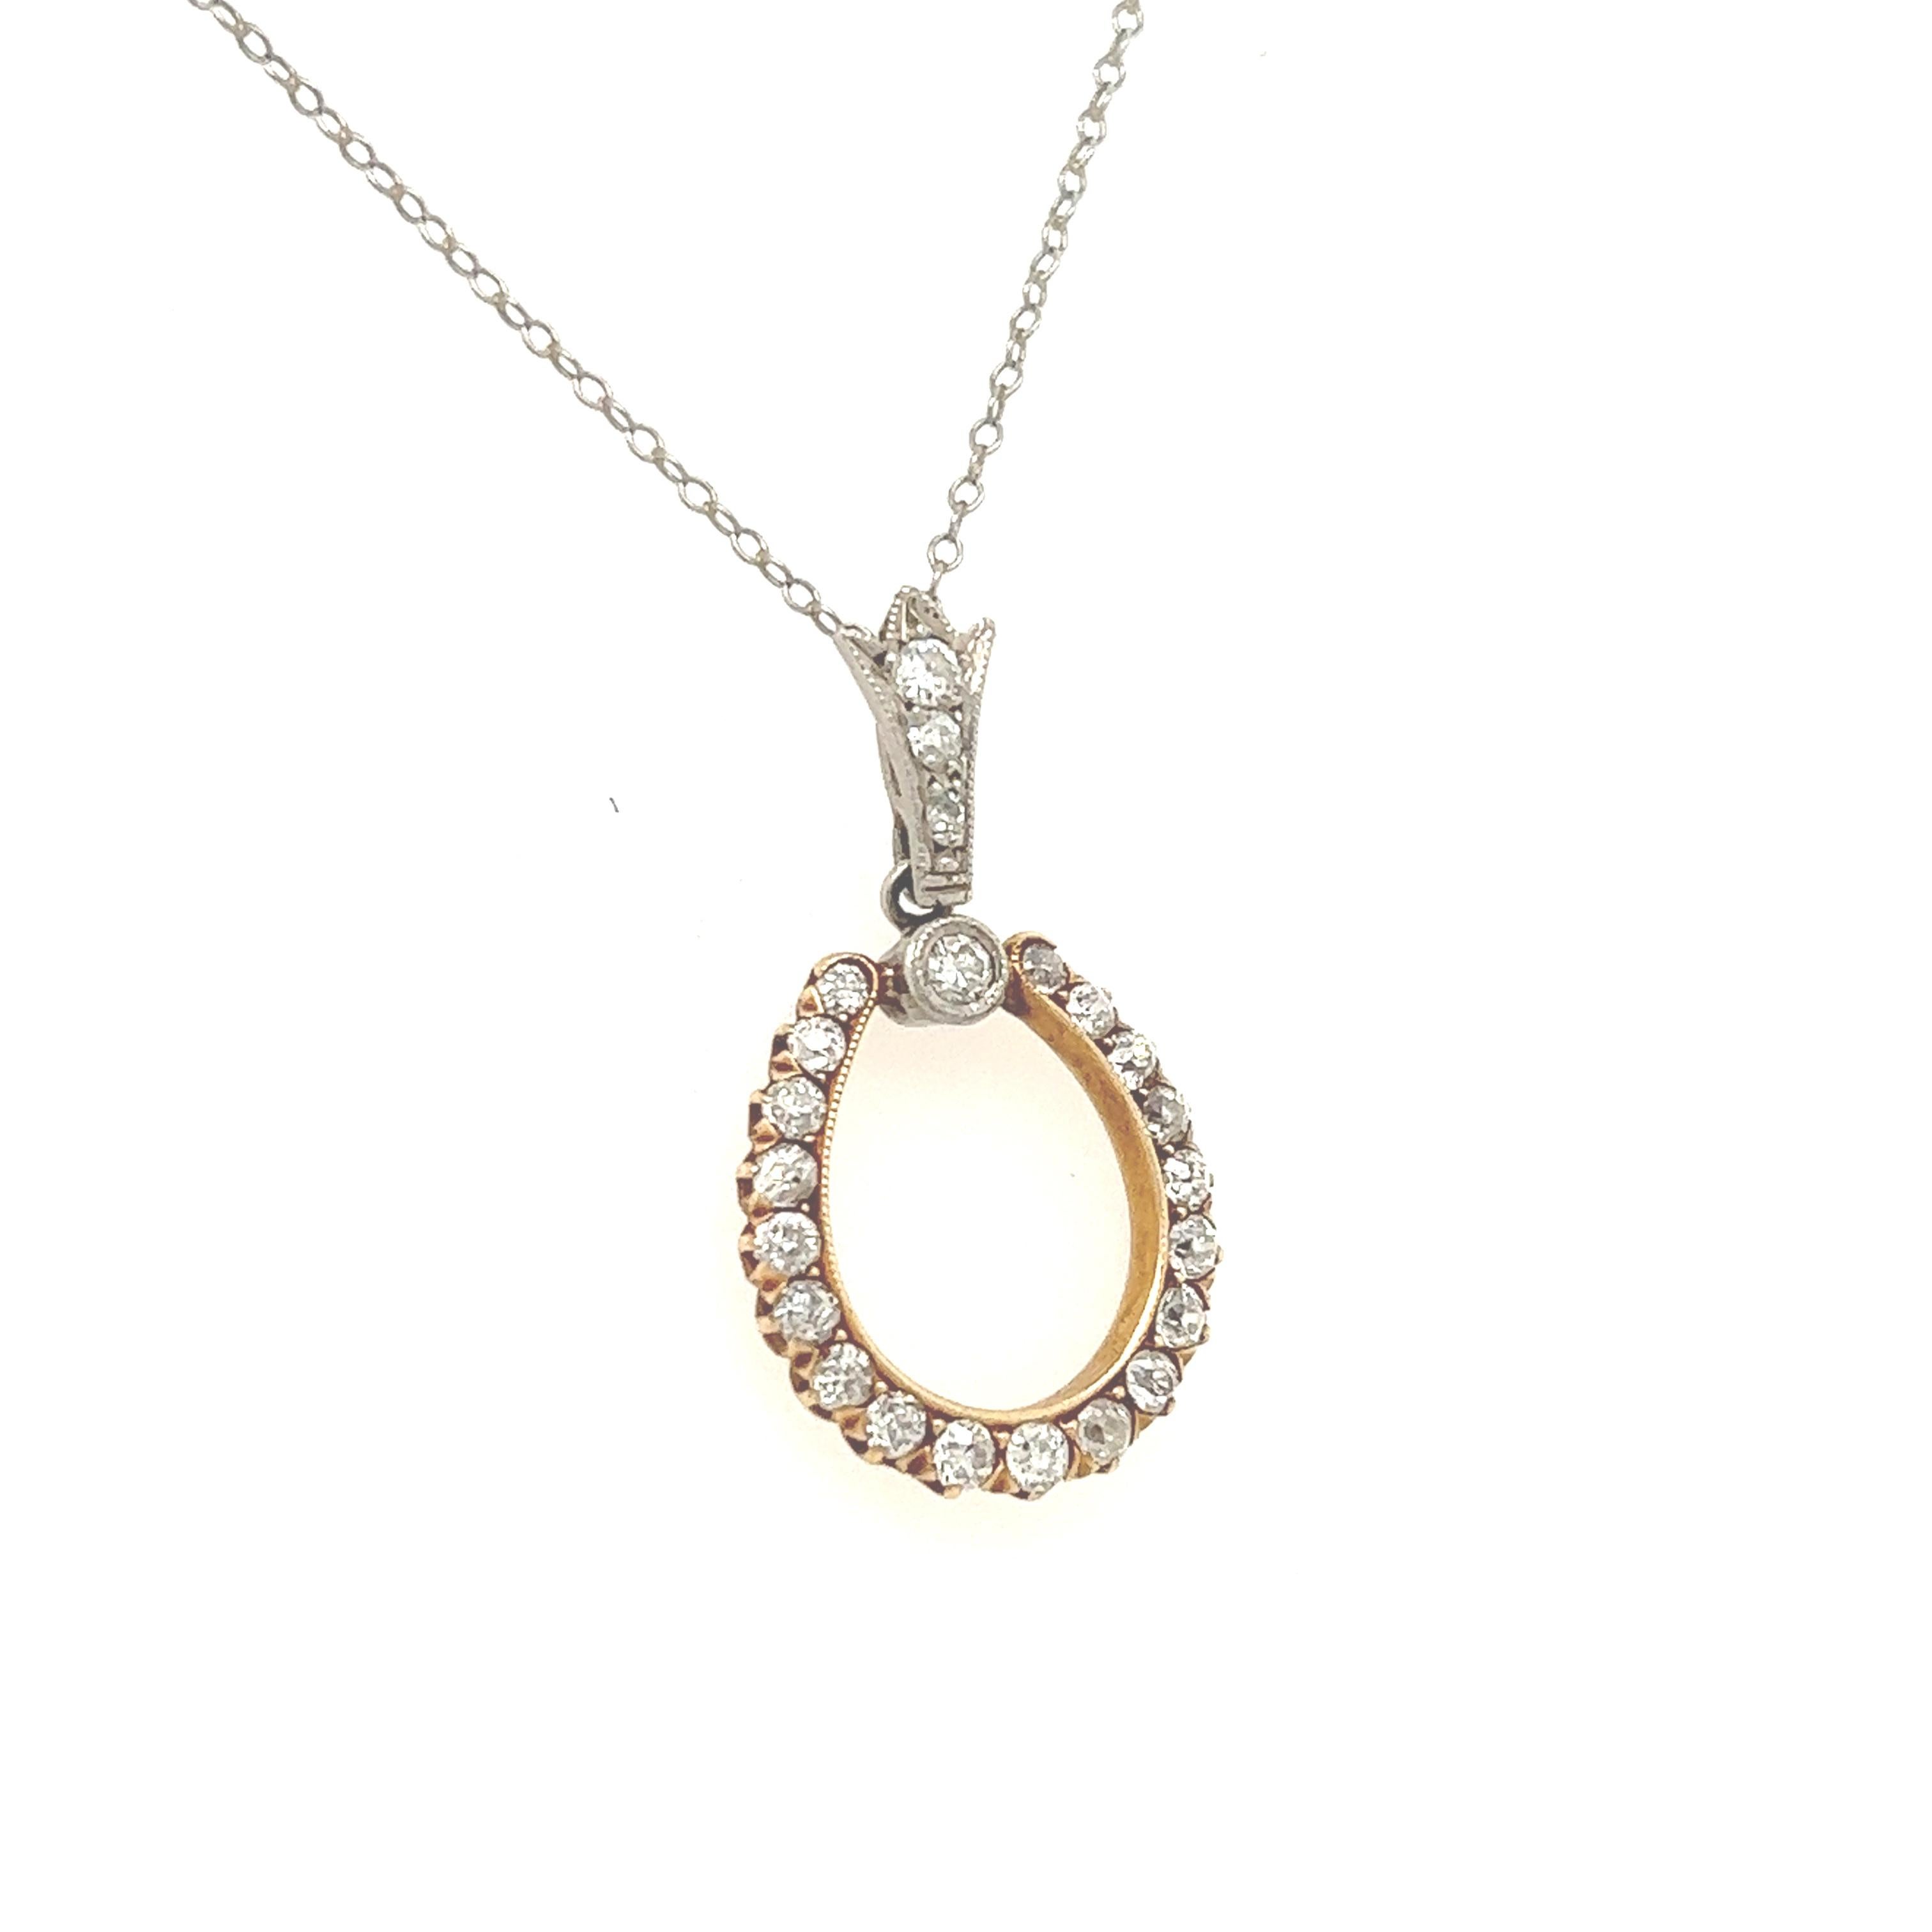 Fantastic treasure from the Victorian era. The necklace shows a horse shoe pendant crafted in yellow gold & platinum. The pendant is set with old mine cut diamonds that graduate in size in the design. The diamonds are white in color showing Vs/Si